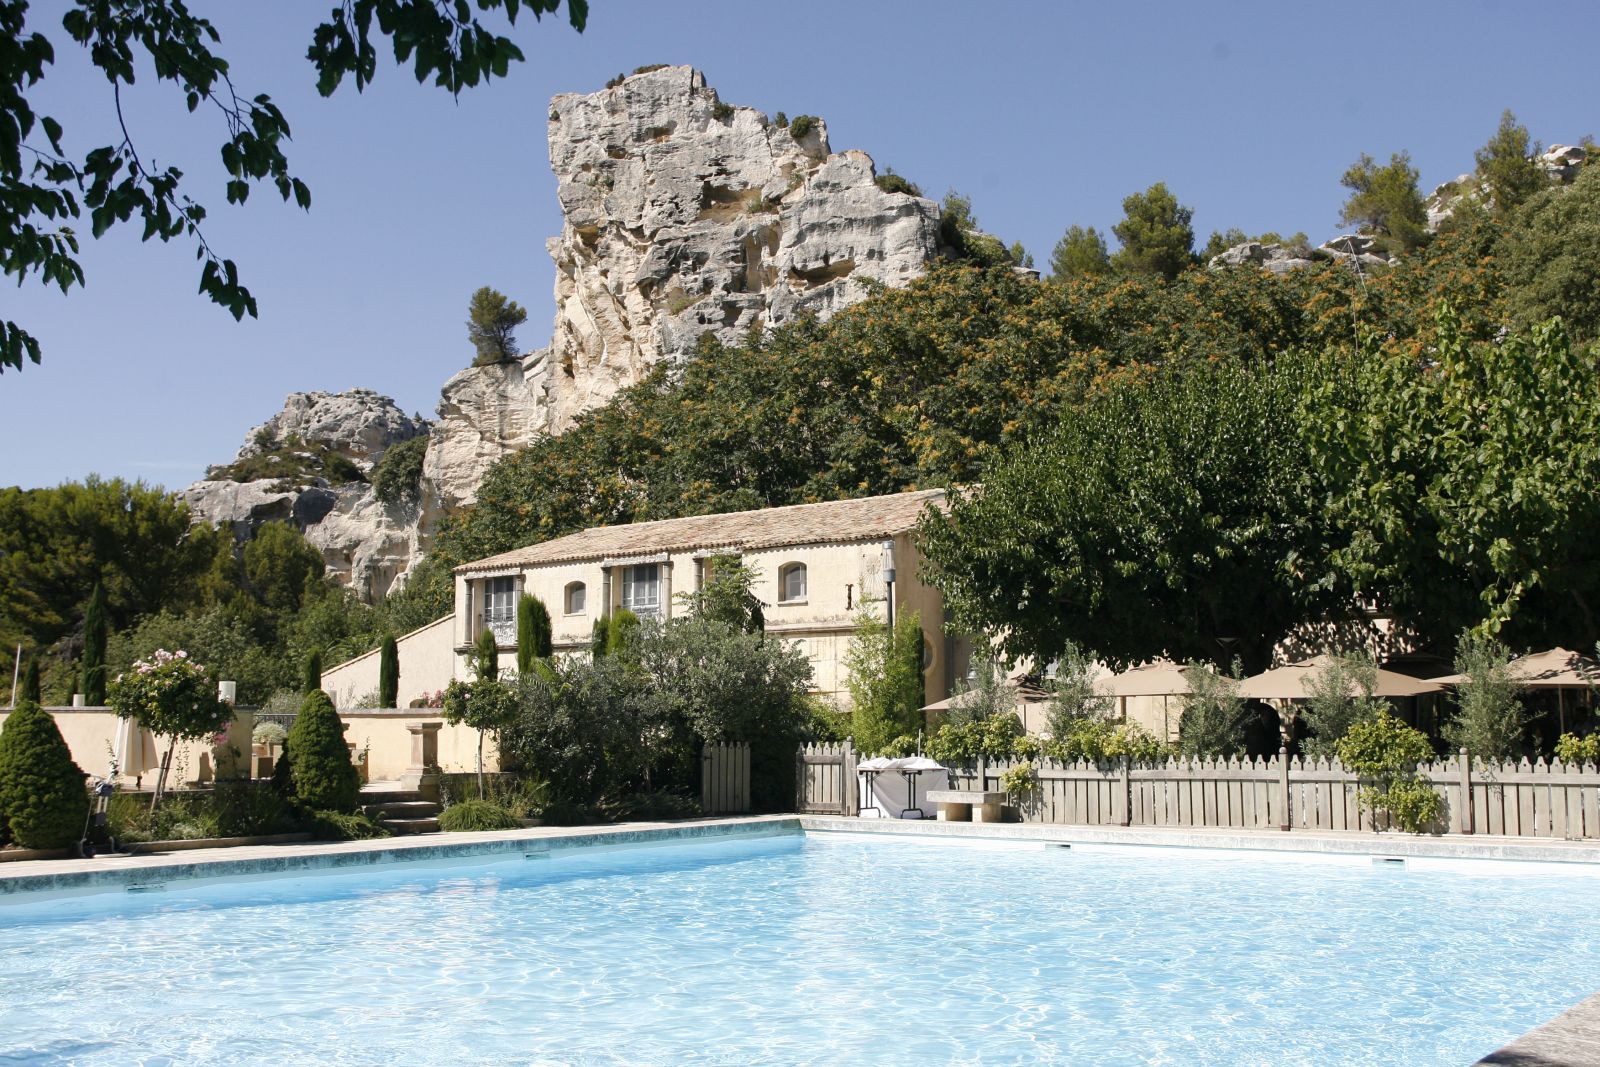 Outdoor swimming pool and facade of Baumaniere, France